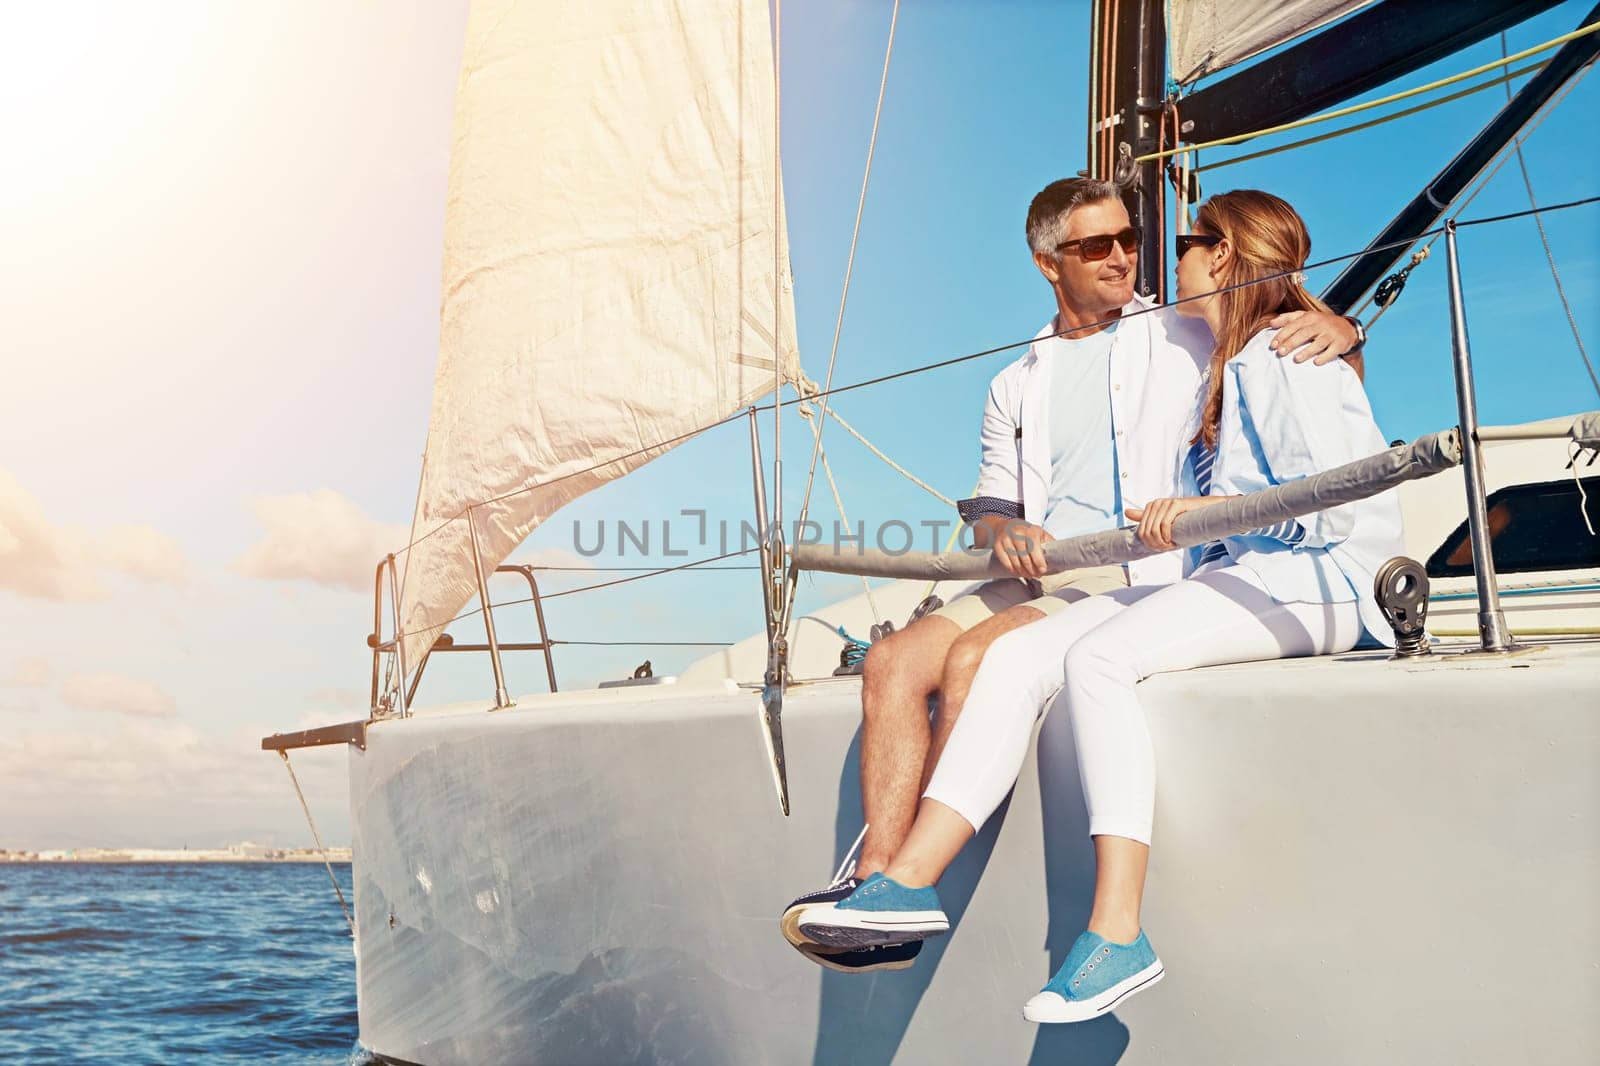 Summer, yacht and love with a couple dating on the ocean for travel, romance or honeymoon celebration. Water, luxury or cruise with a married man and woman sitting together on a boat out at sea.